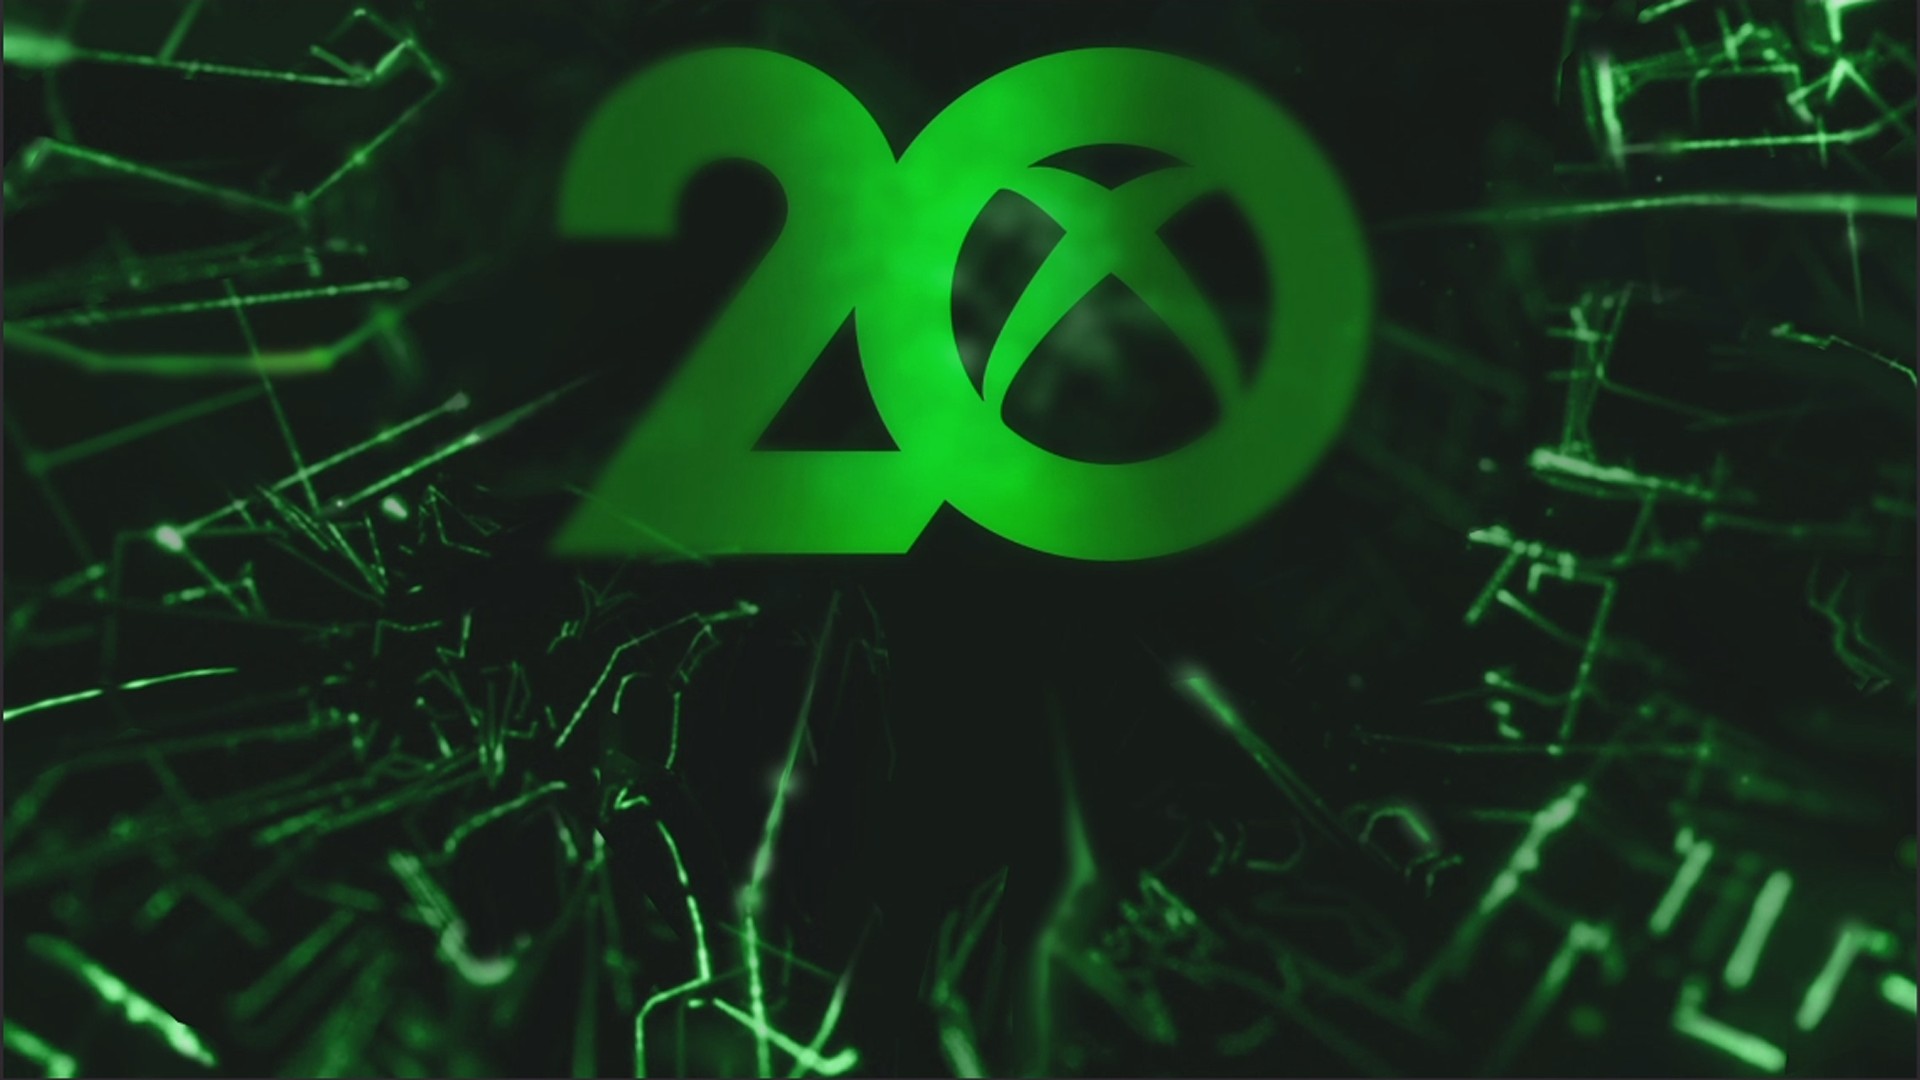 Dynamic 20th anniversary background